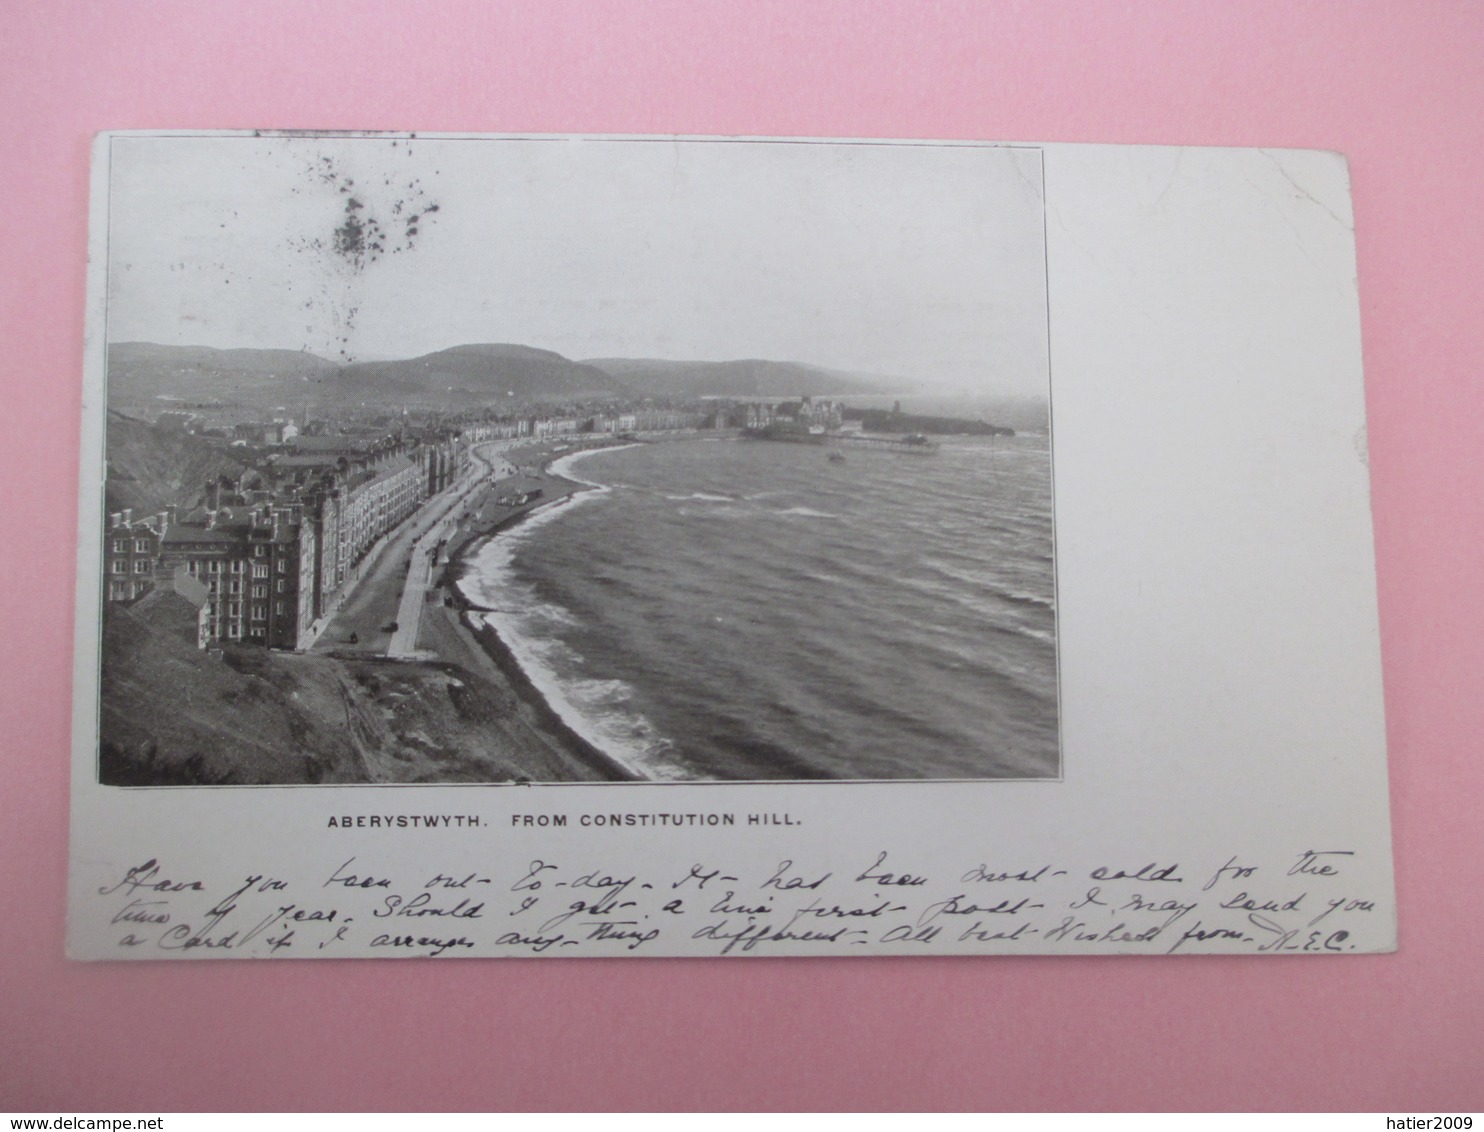 Aberystwyth, From Constitution Hill_1906' - Cardiganshire